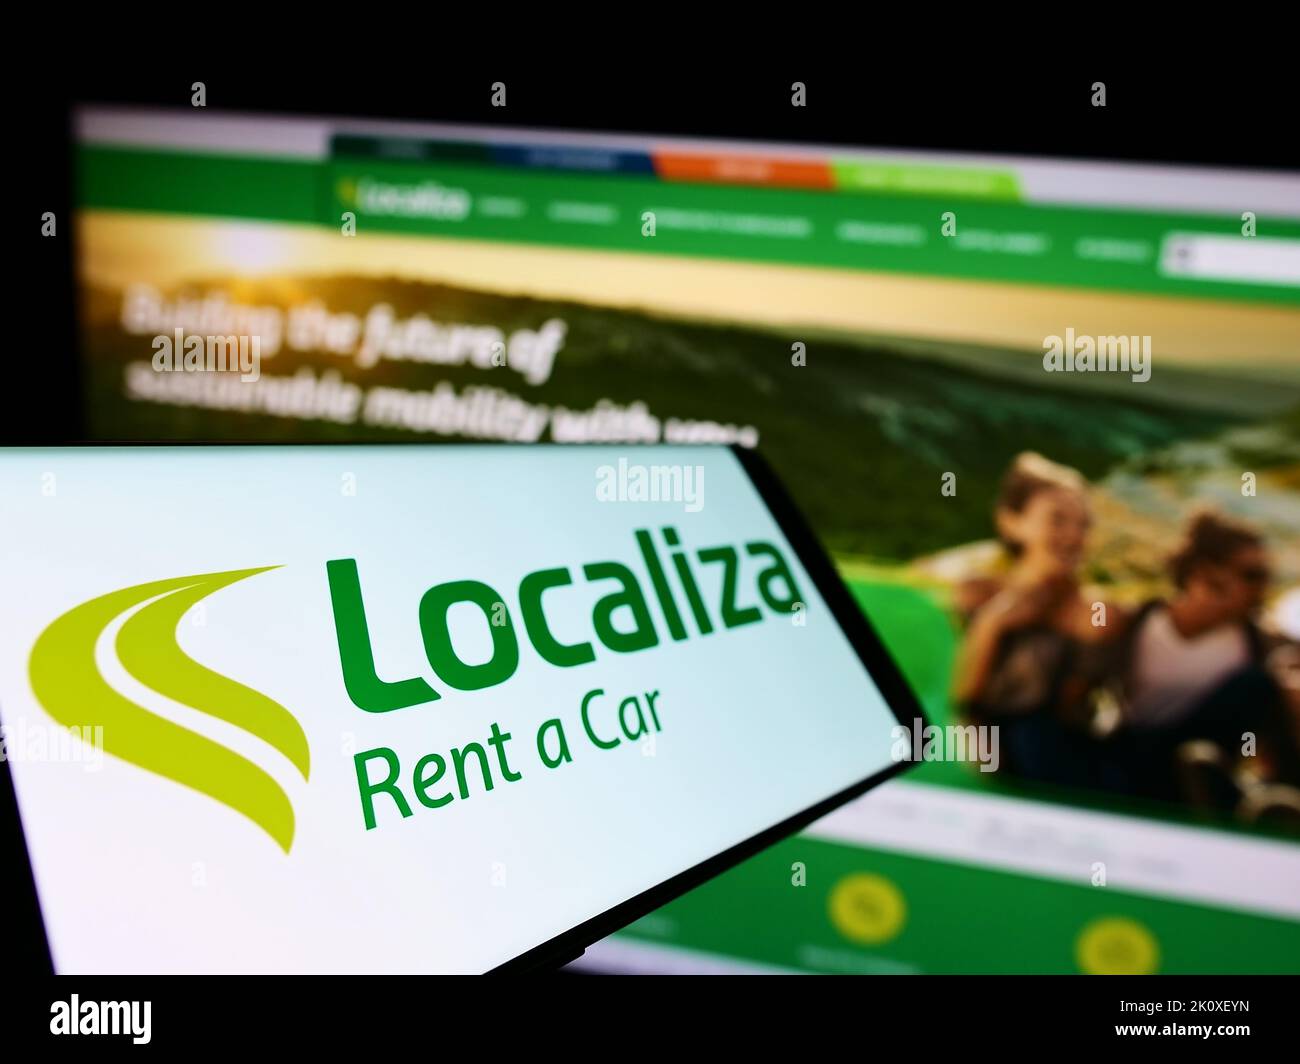 Cellphone with logo of Brazilian company Localiza Rent a Car S.A. on screen in front of business website. Focus on left of phone display. Stock Photo